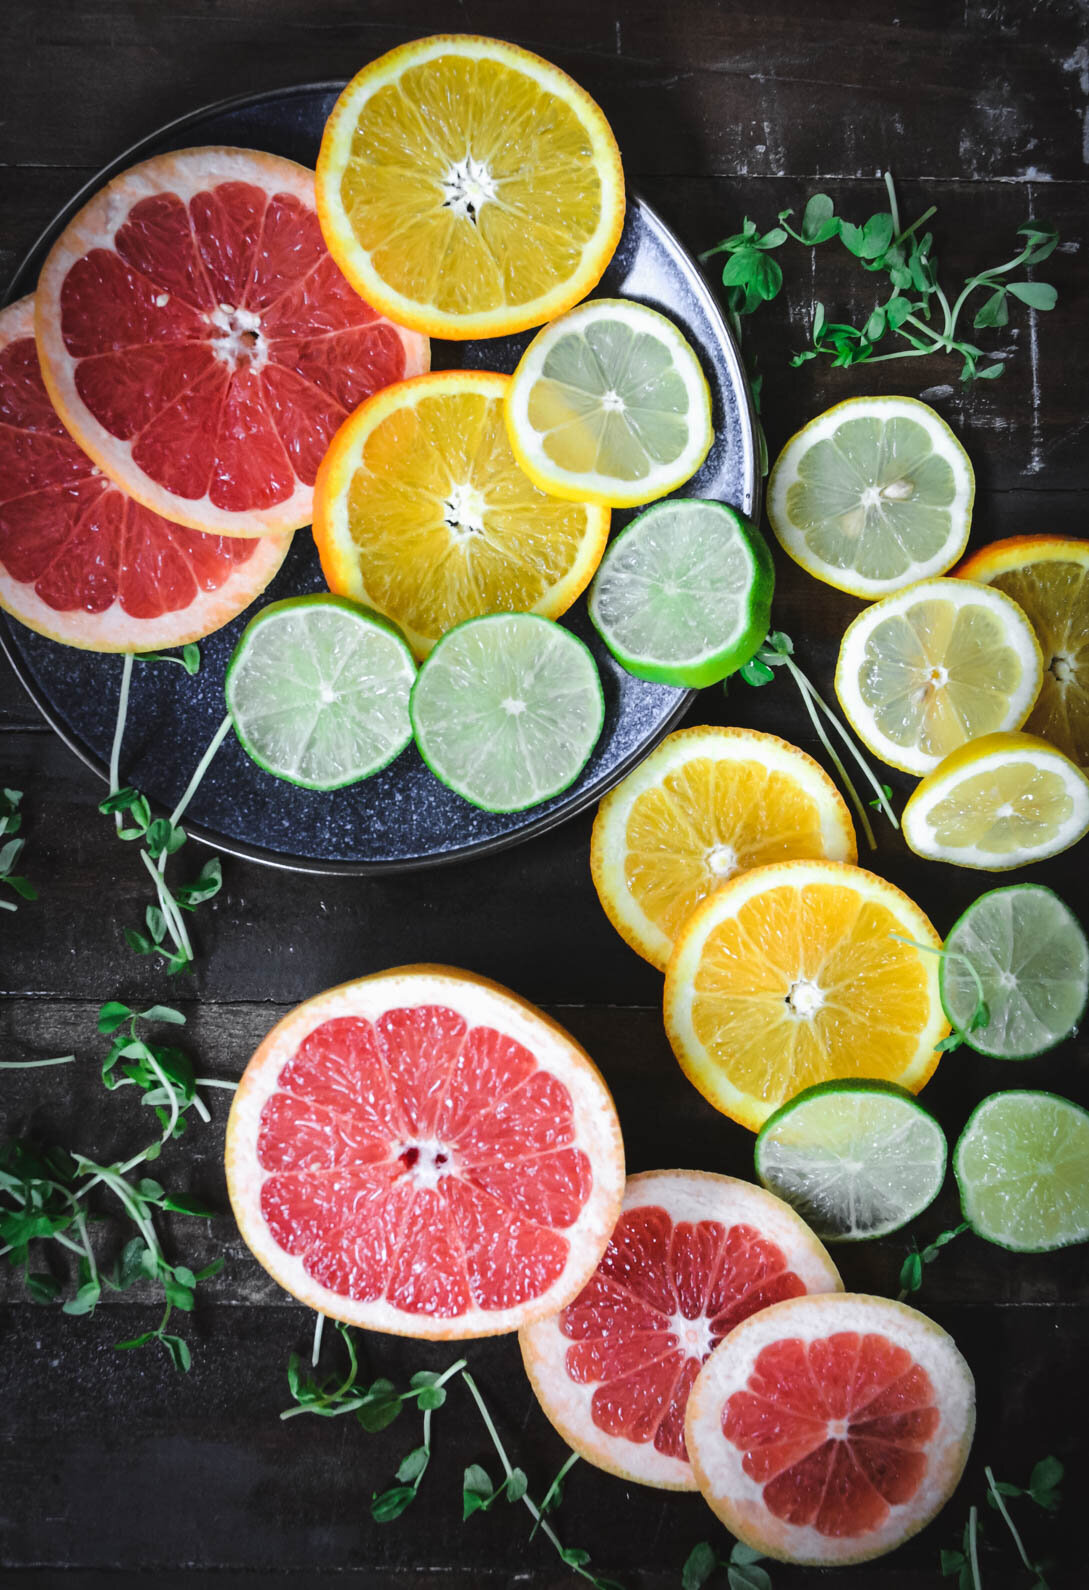  Cold and flu season is among us but there are very simple and practical things you can do to keep your system strong particularly through nutrition. Check out these amazing 8 foods that help to strengthen your immune system. #nutrition, #calmeats, #immunesupport, #immunesystem, #coldseason, #foodismedicine #citrus, #vitamins, #immunesystem 